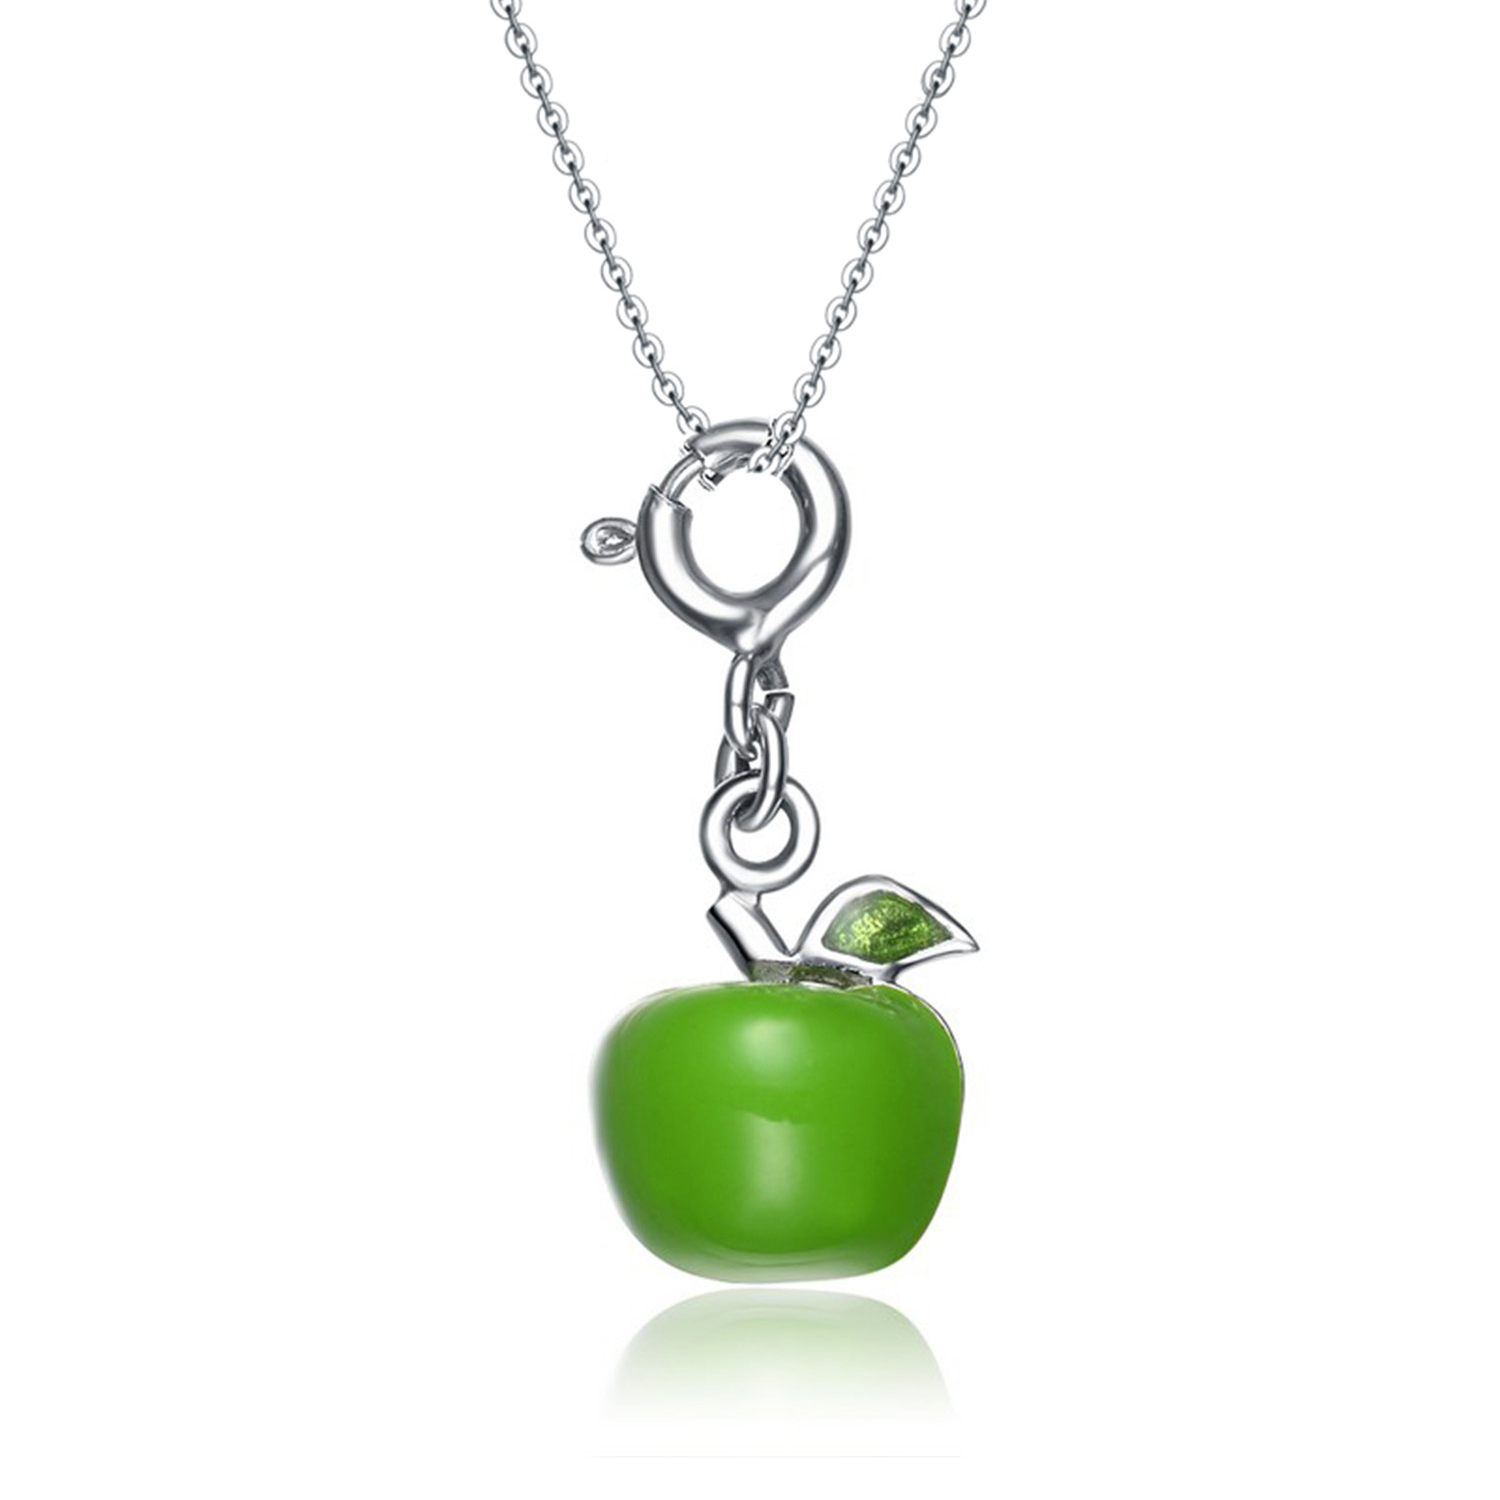 New Arrival 925 sterling silver rhodium plated jewelry fruit pendant necklace women jewelry (图3)